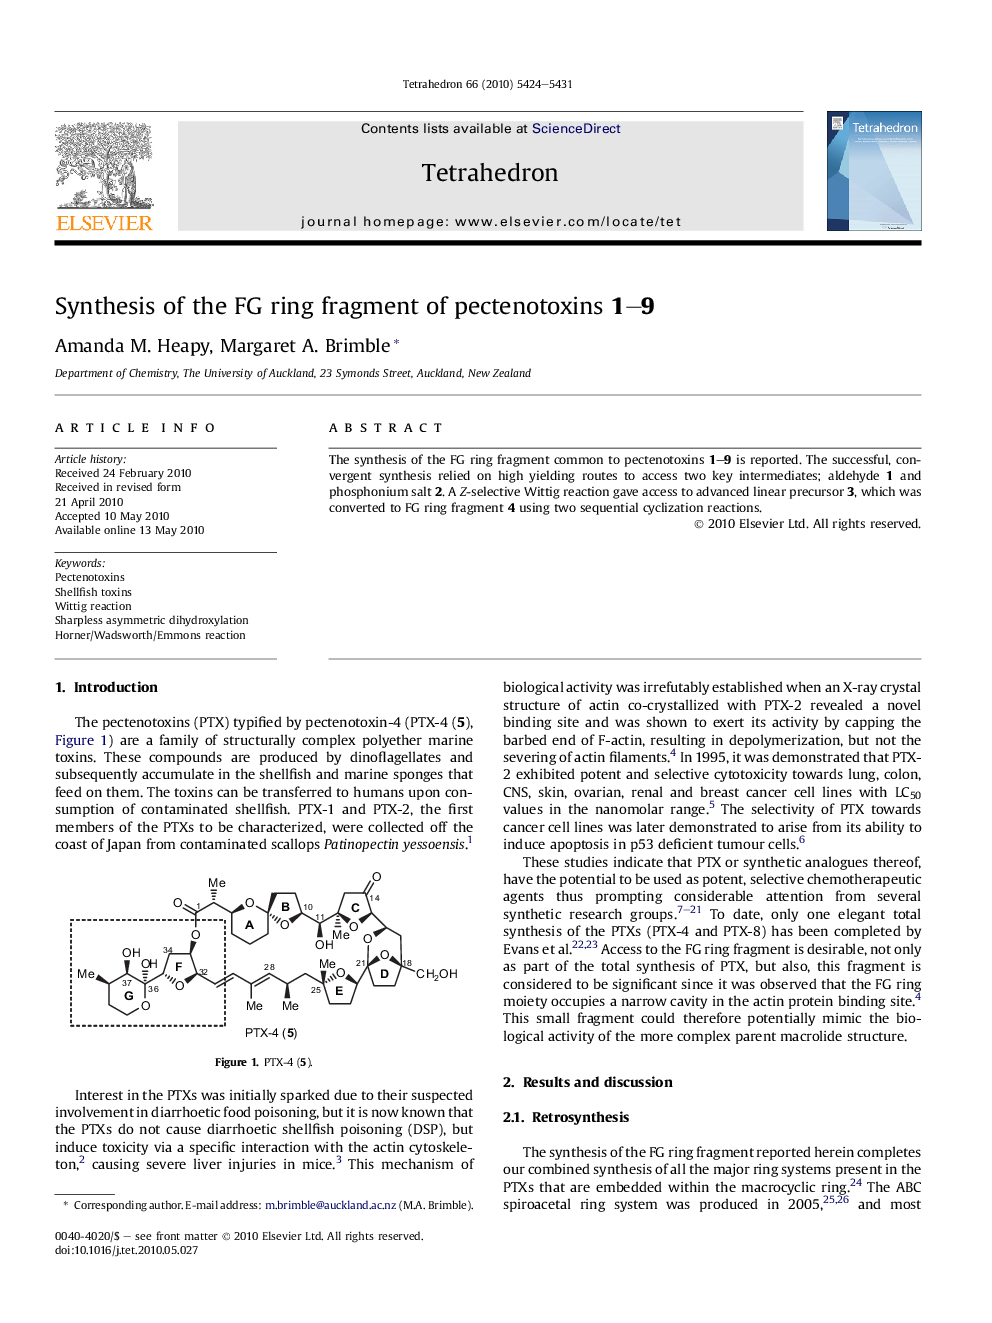 Synthesis of the FG ring fragment of pectenotoxins 1-9